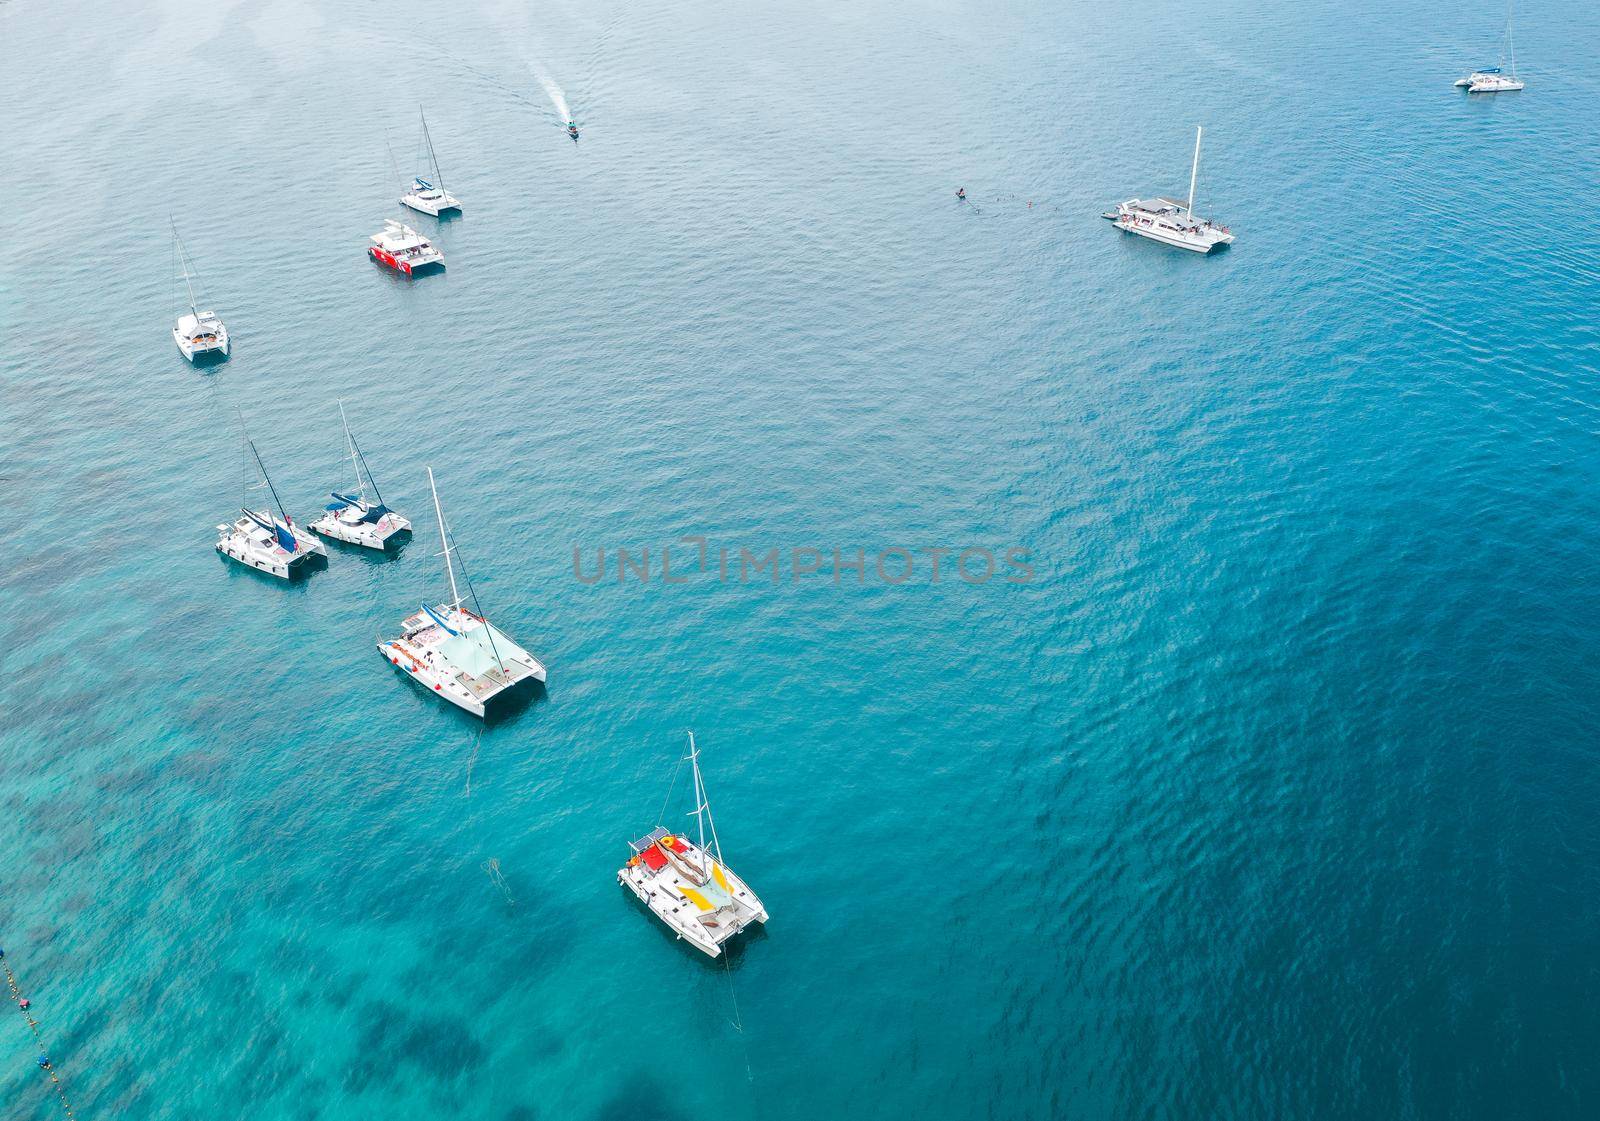 Coral island, koh He, beach and boats in Phuket province, Thailand by worldpitou